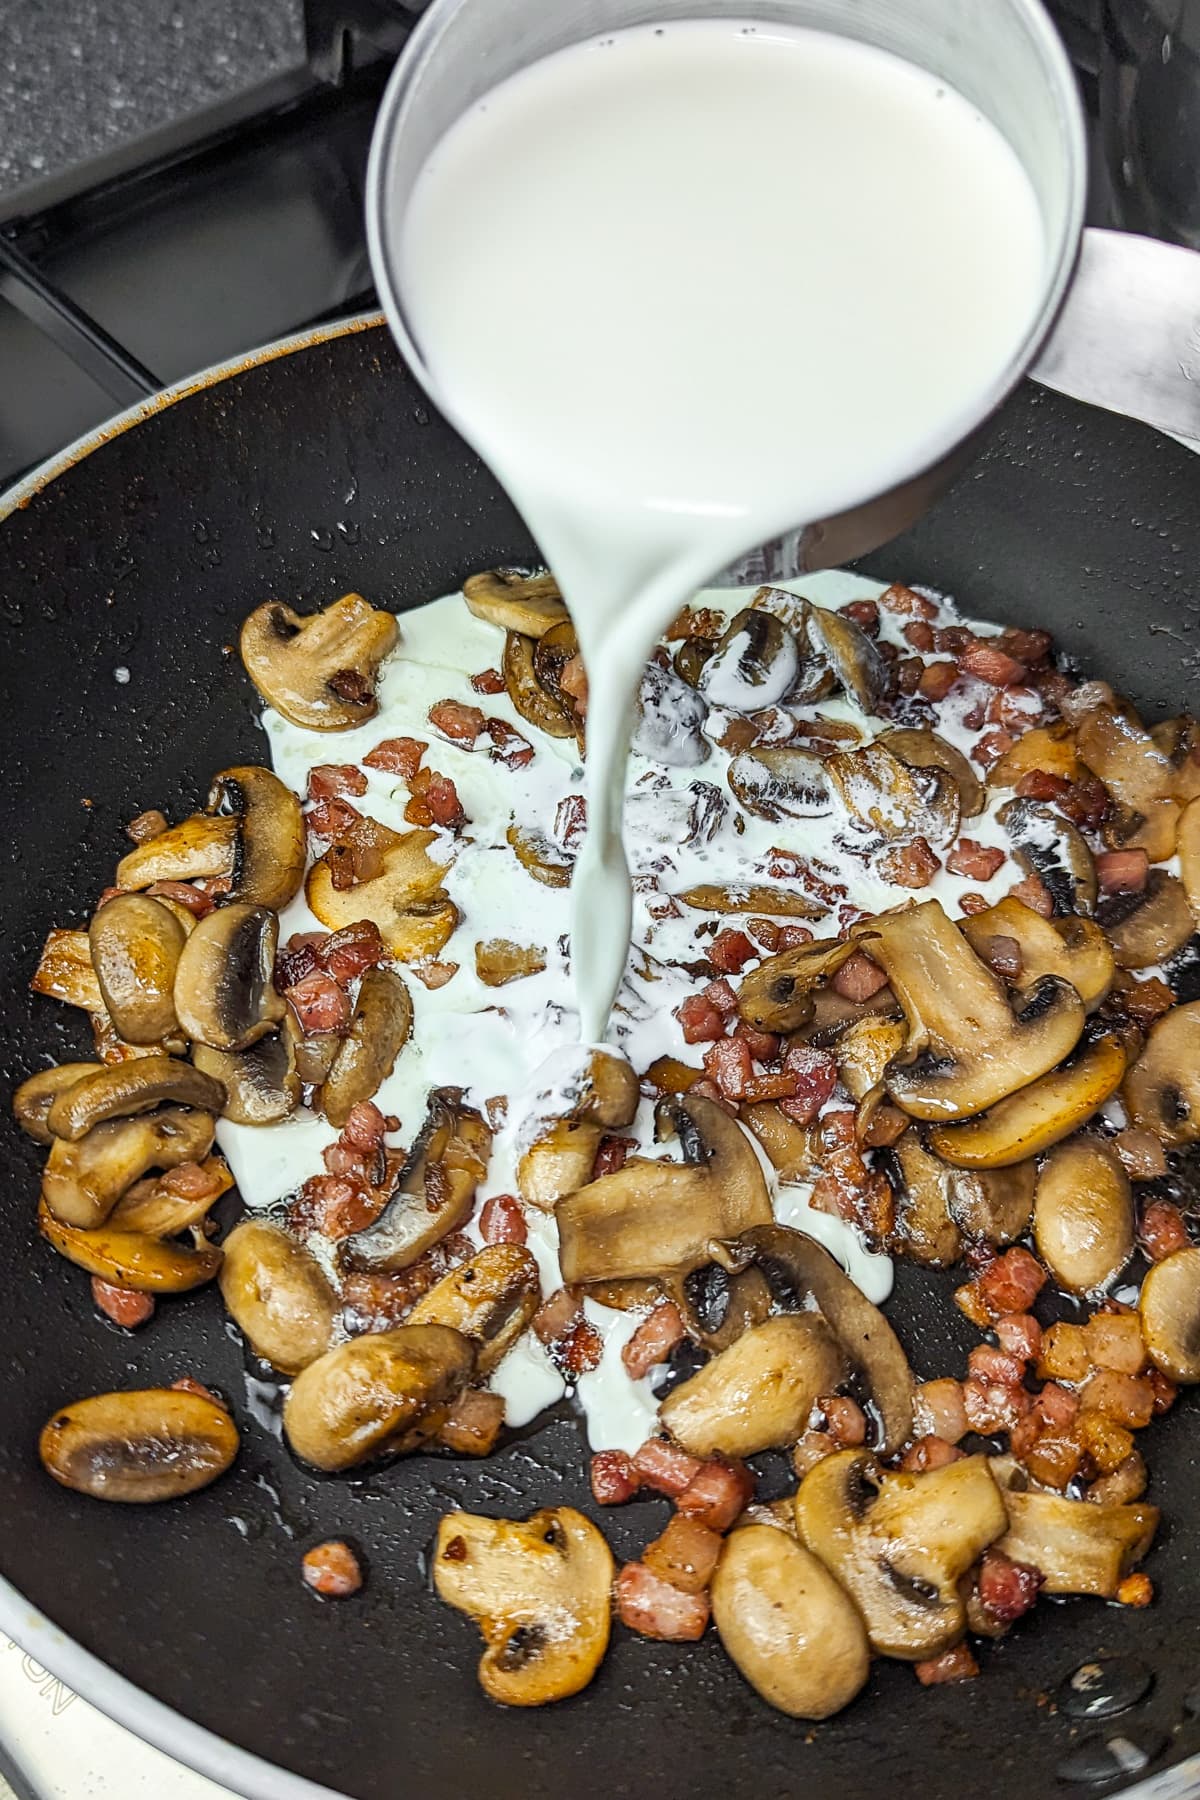 Cream being poured over the sautéed mushrooms and ham in the frying pan.